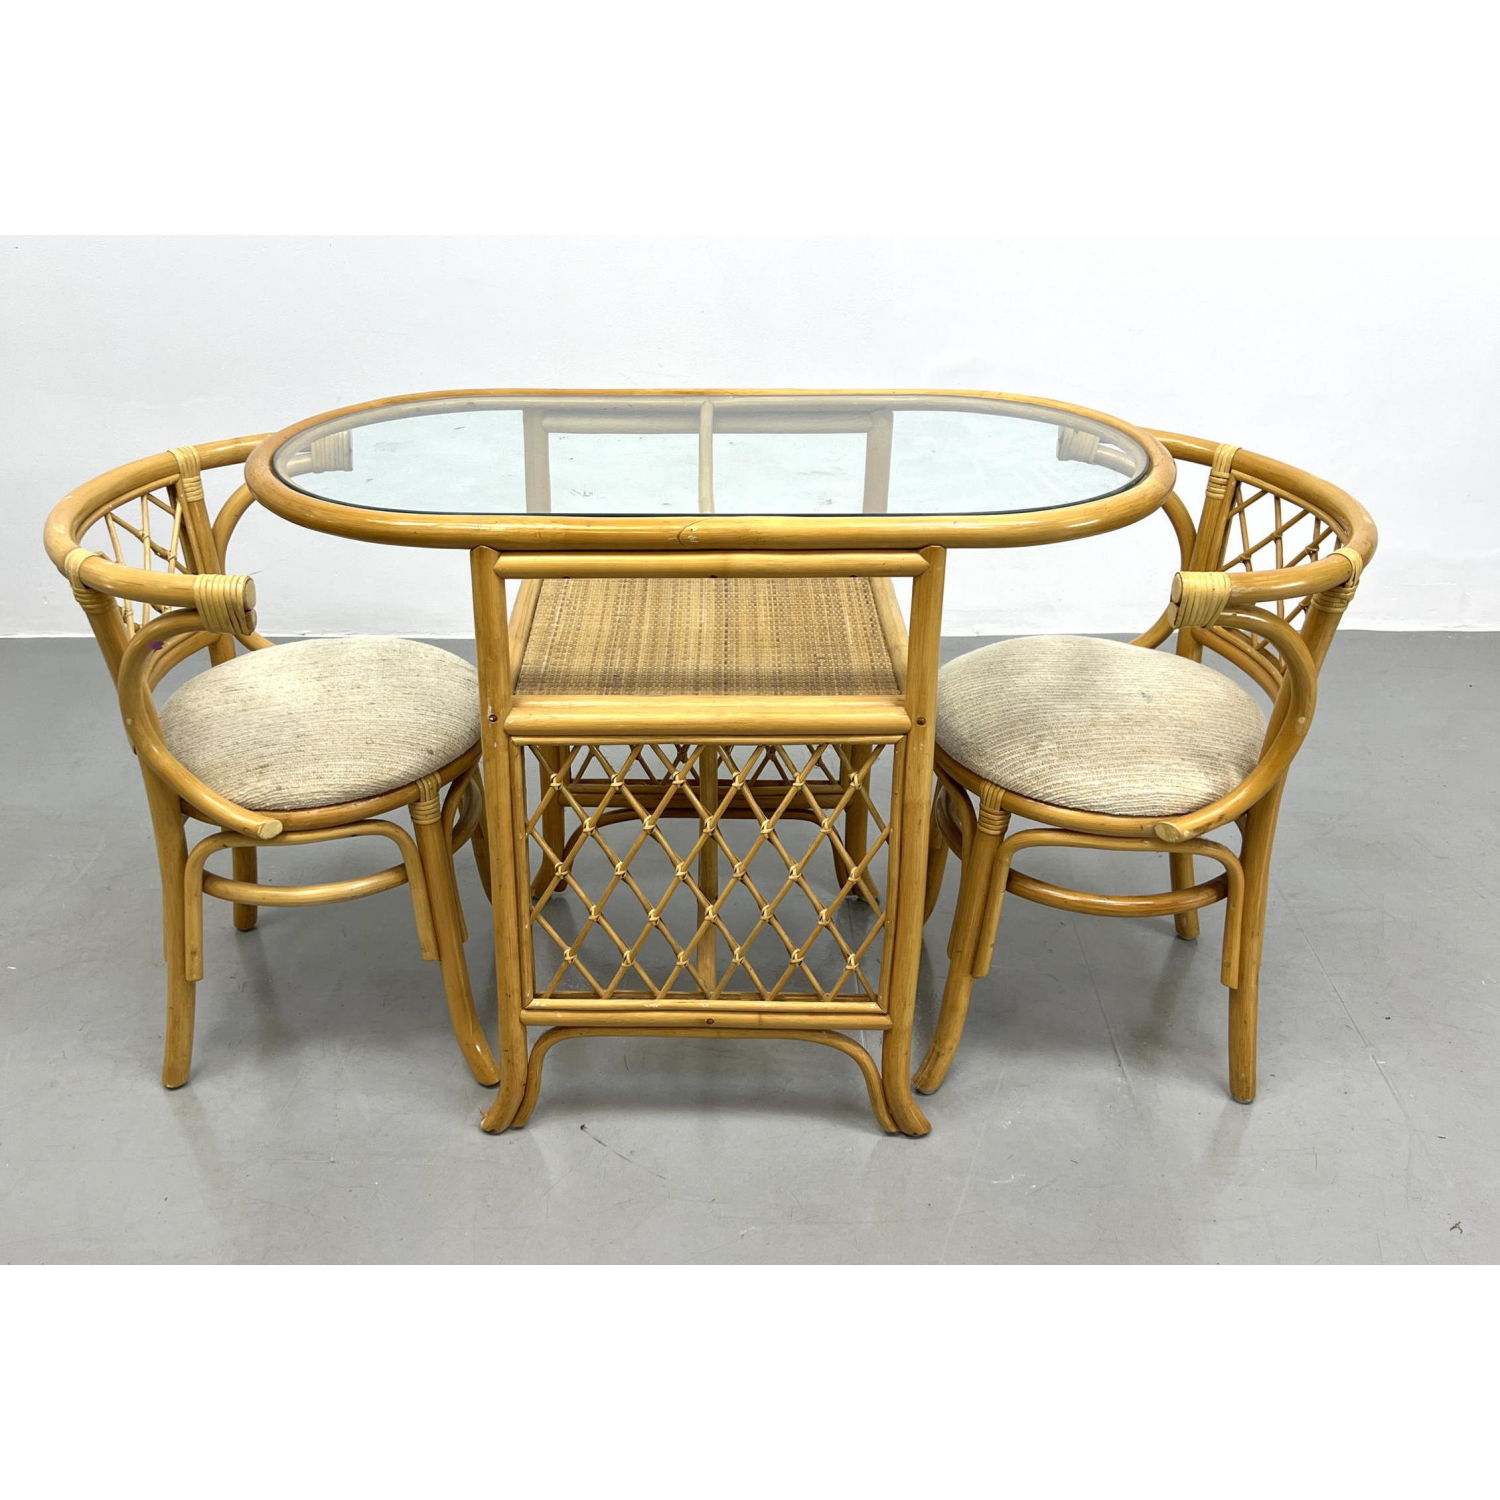 3pc Bamboo Dinette Set. Two Arm